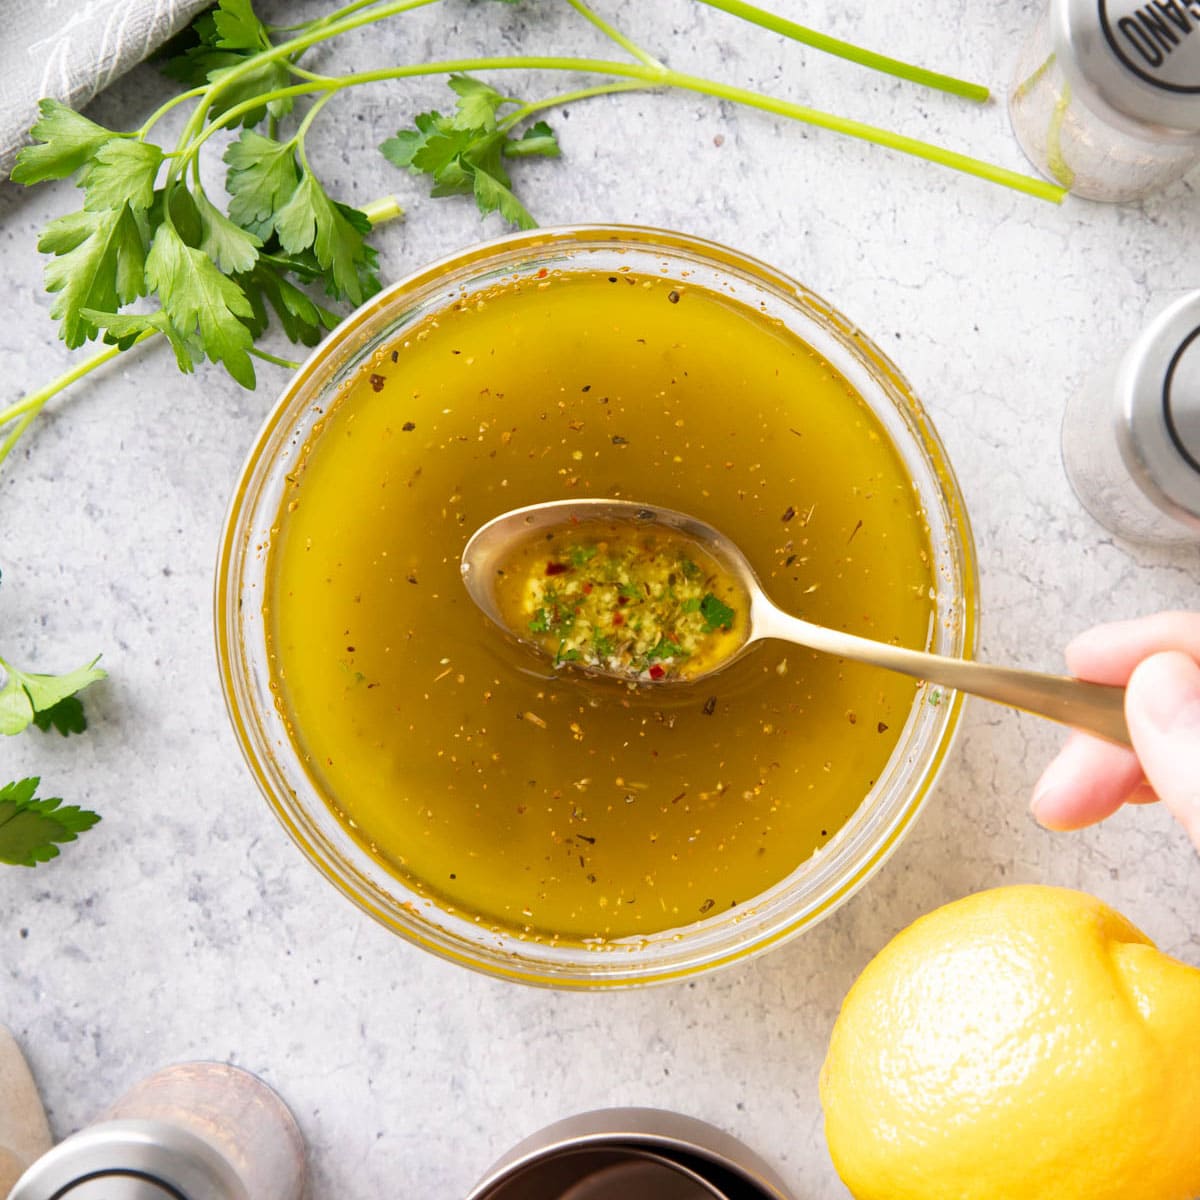 Spooning this Italian Dressing Recipe from a mixing bowl to showcase the ingredients, including herbs, olive oil, lemon juice, and more.